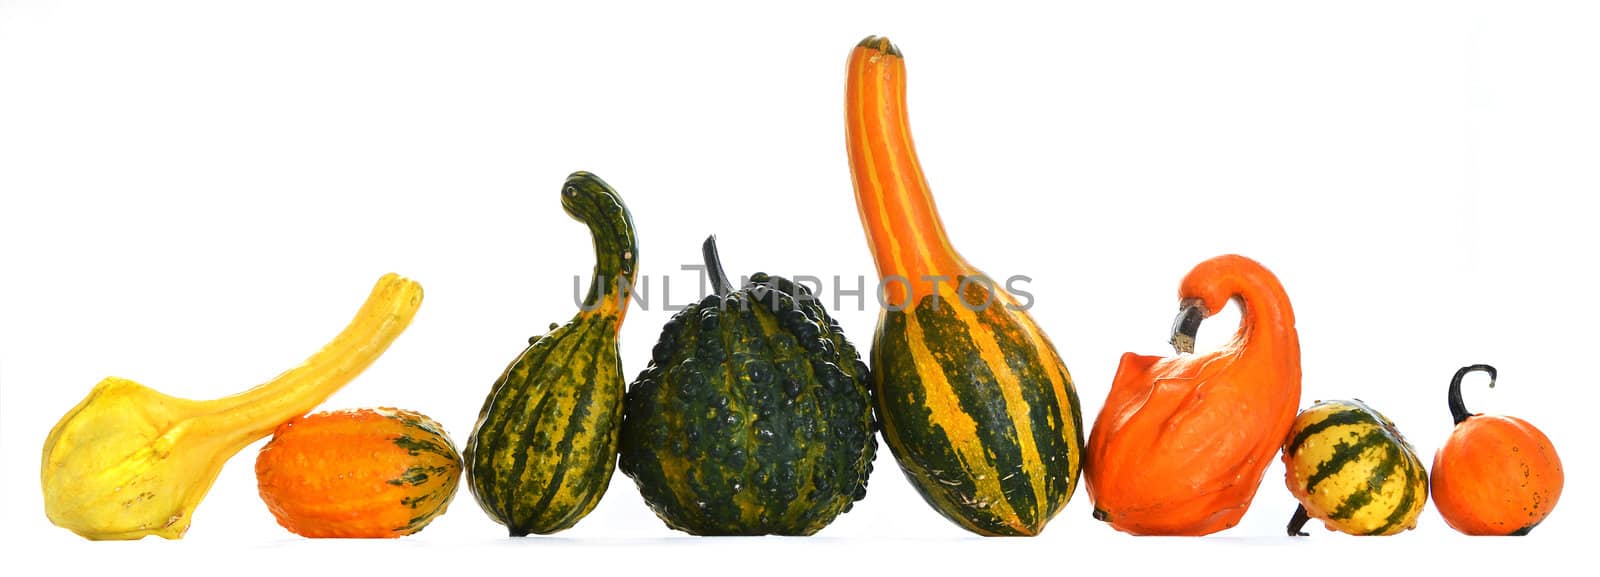 Gourds by vickyphoto